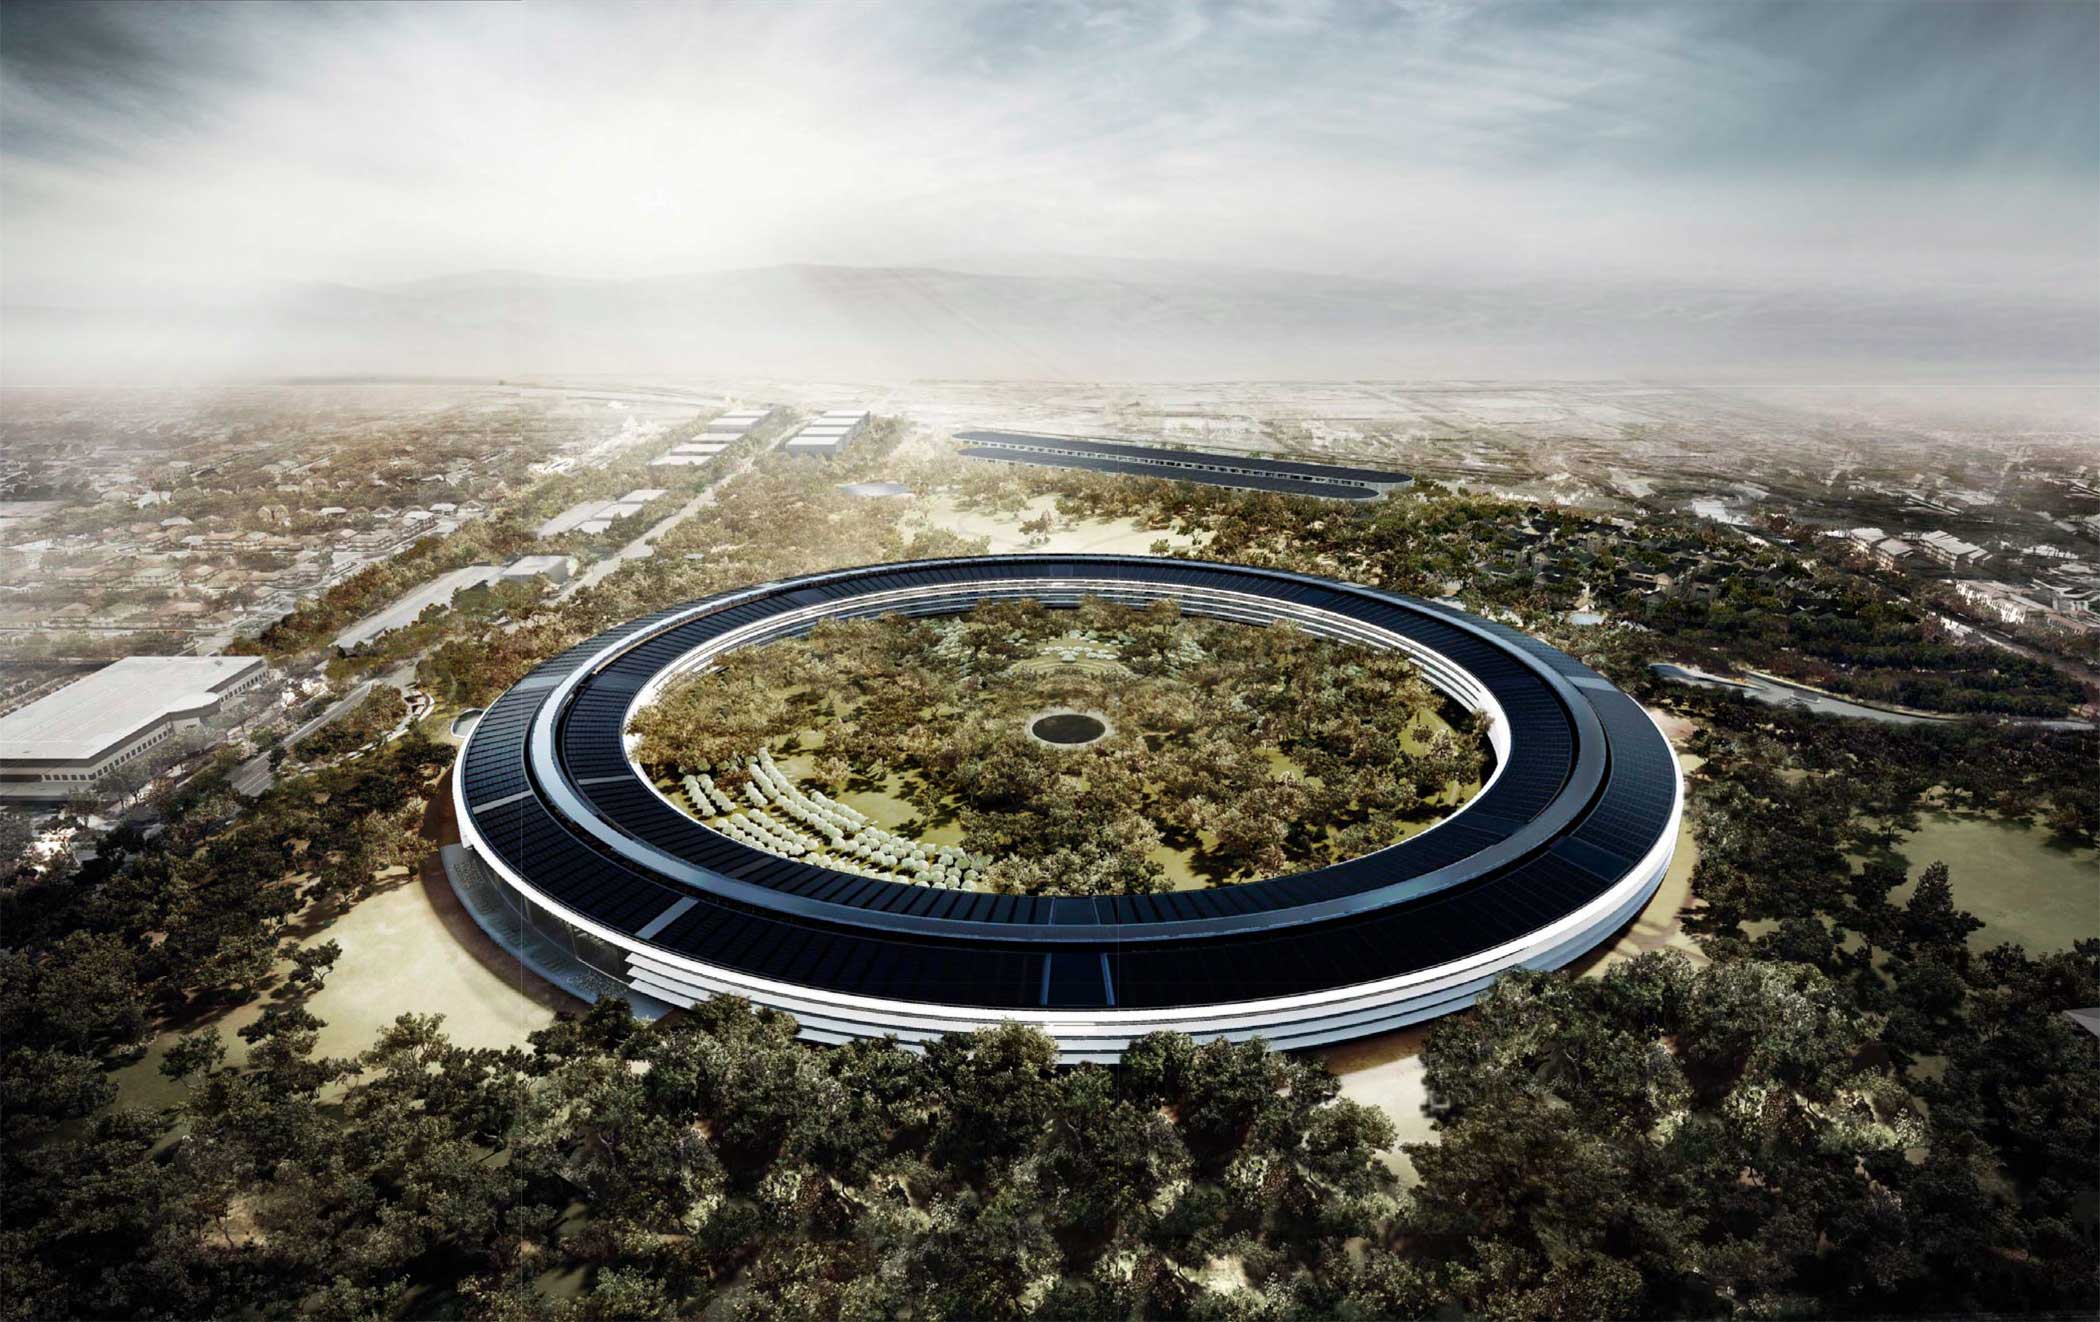 Apple 2.8 million sq. ft. Cupertino, Calif., The four-story circular building, to be completed in 2016 is designed to house some 12,000 employees.